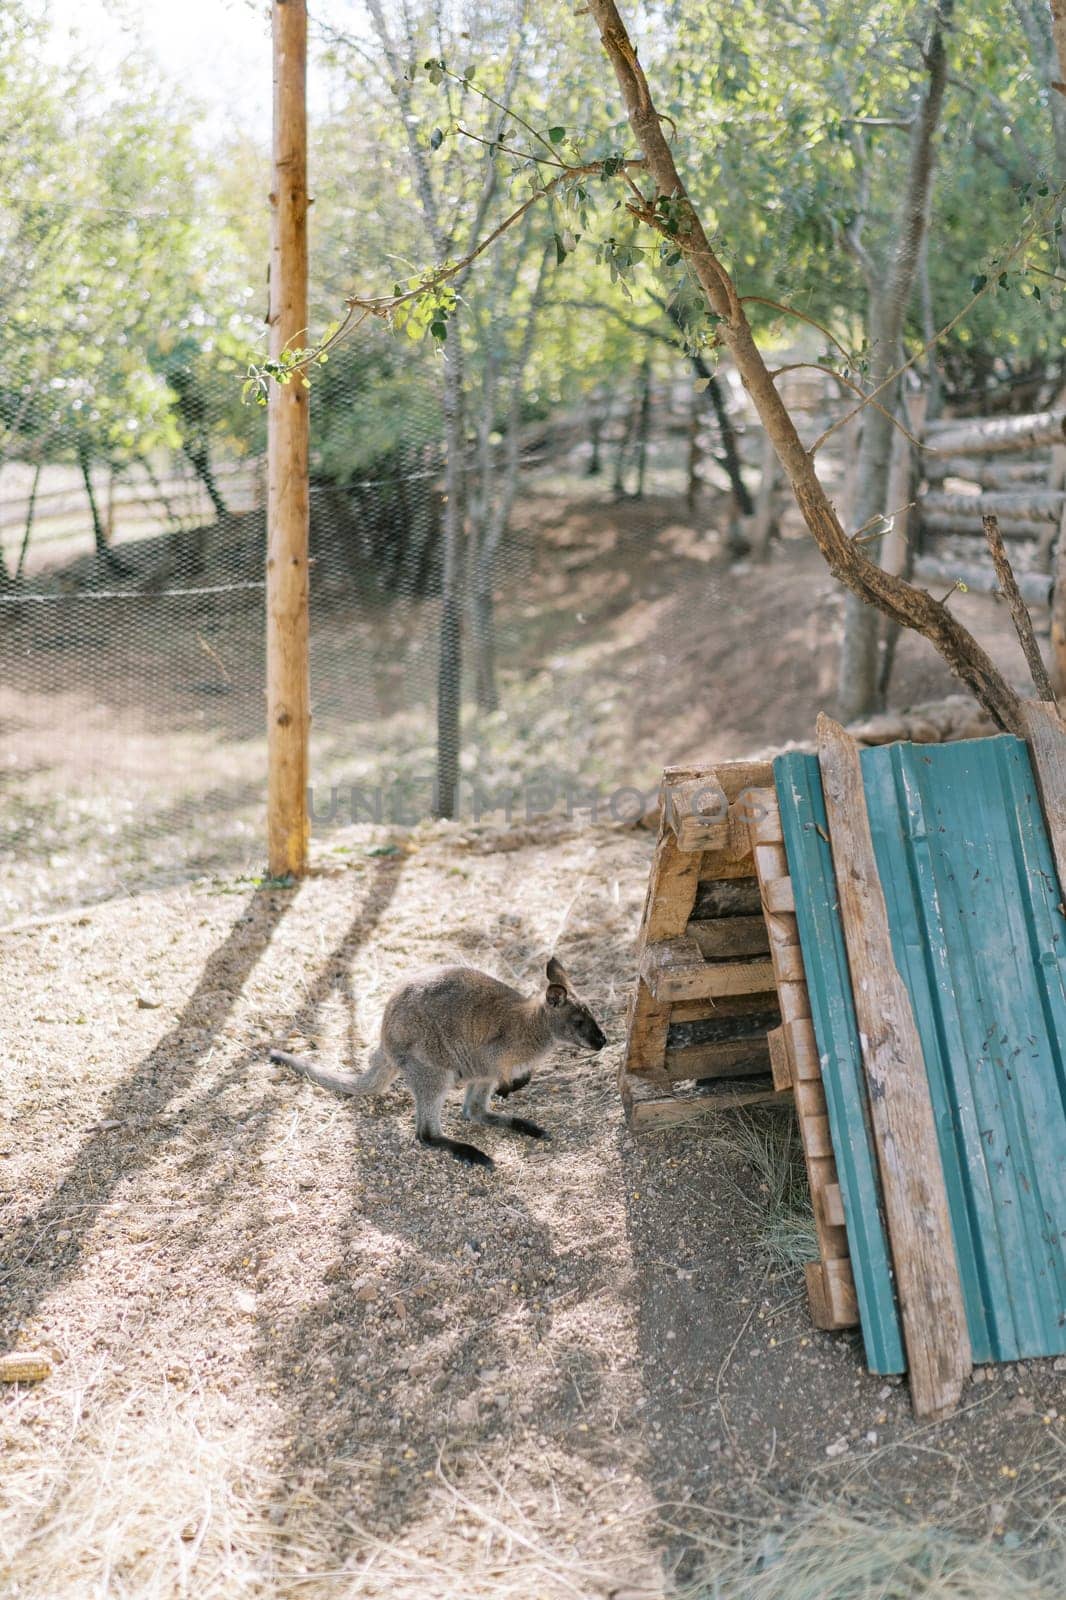 Little kangaroo sits near a wooden shed in the park and looks inside by Nadtochiy